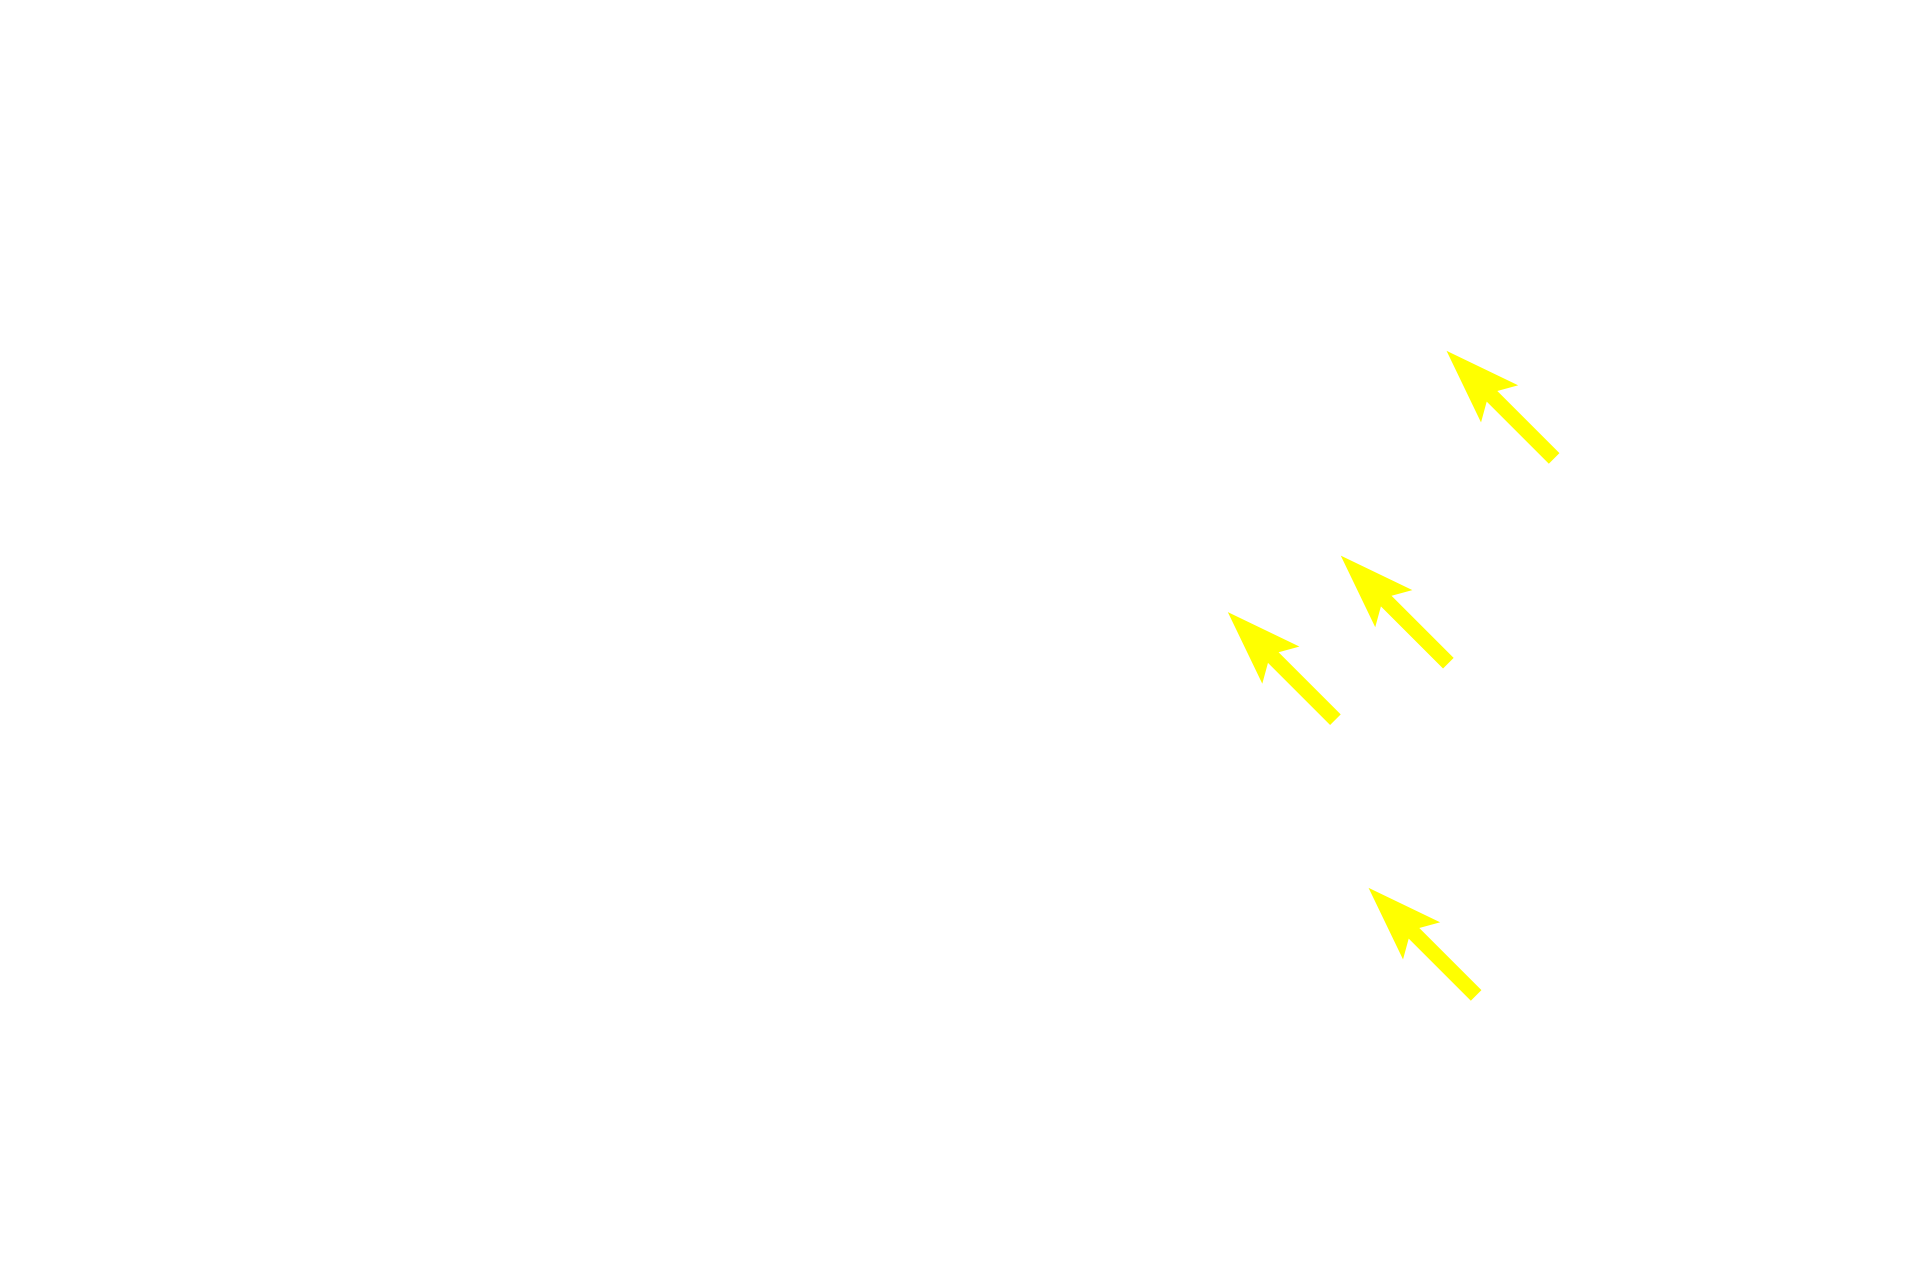 Dendrites <p>These multipolar neurons are located in an autonomic ganglion in the sympathetic division of the autonomic nervous system.  Sympathetic ganglia are generally located at some distance from the organs they innervate and contain large numbers of both incoming preganglionic axons as well as exiting, efferent postganglionic axons from the multipolar neurons.  The neuron cell bodies are widely dispersed and extend numerous dendrites.  Eccentrically-located nuclei are common.  Satellite Schwann cells surround each neuronal in the ganglion.  Their cytoplasmic processes form a capsule around the cell body. 100x, 1000x</p>
